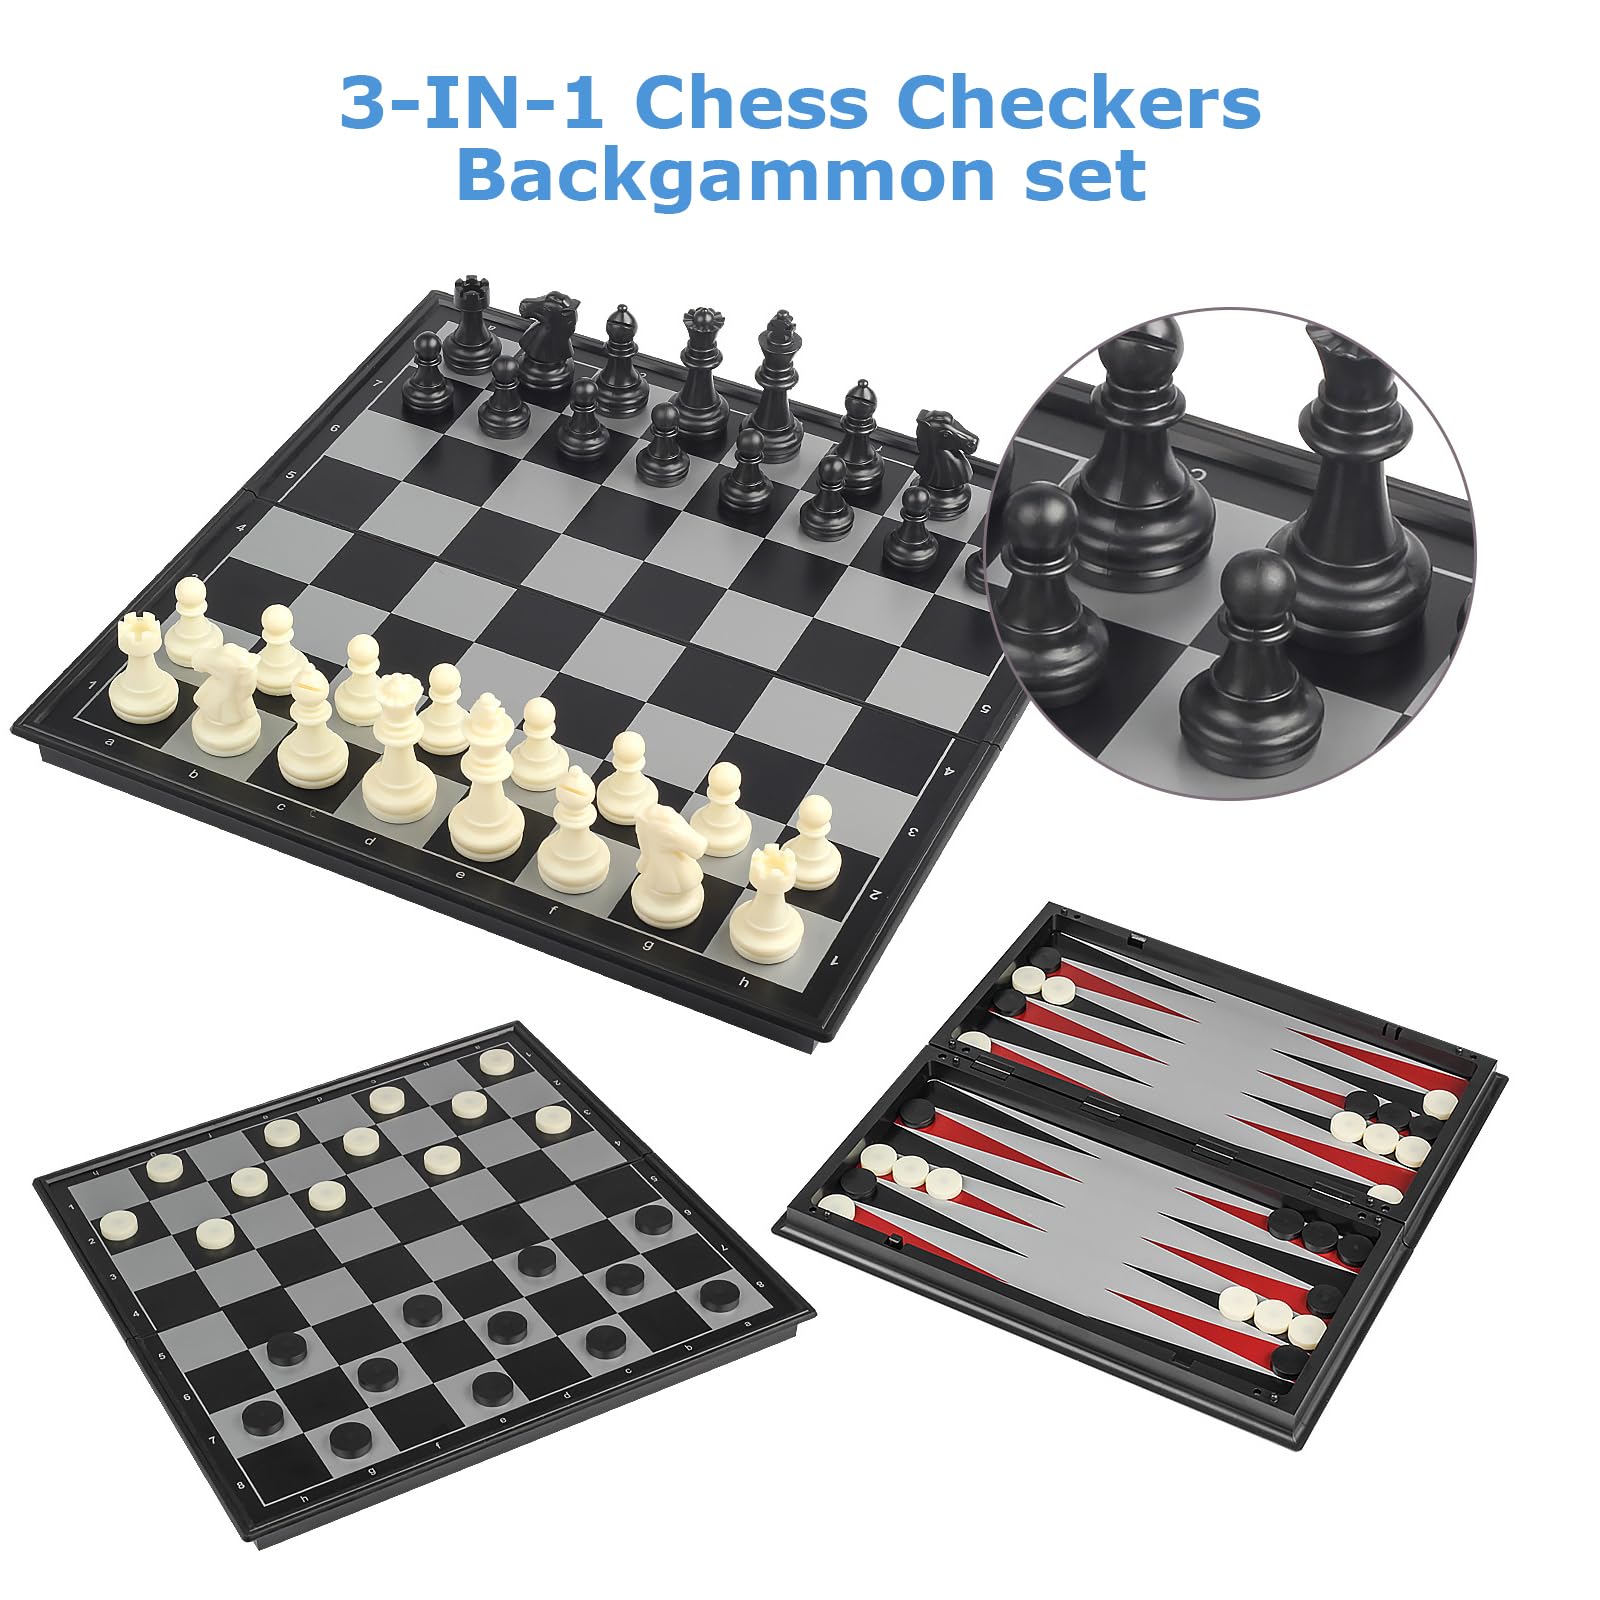 3 in 1 Chess Checkers Backgammon Set - 9.7 Inches Magnetic Travel Chess Set Portable Folding Board Game - 2 Storage Bag